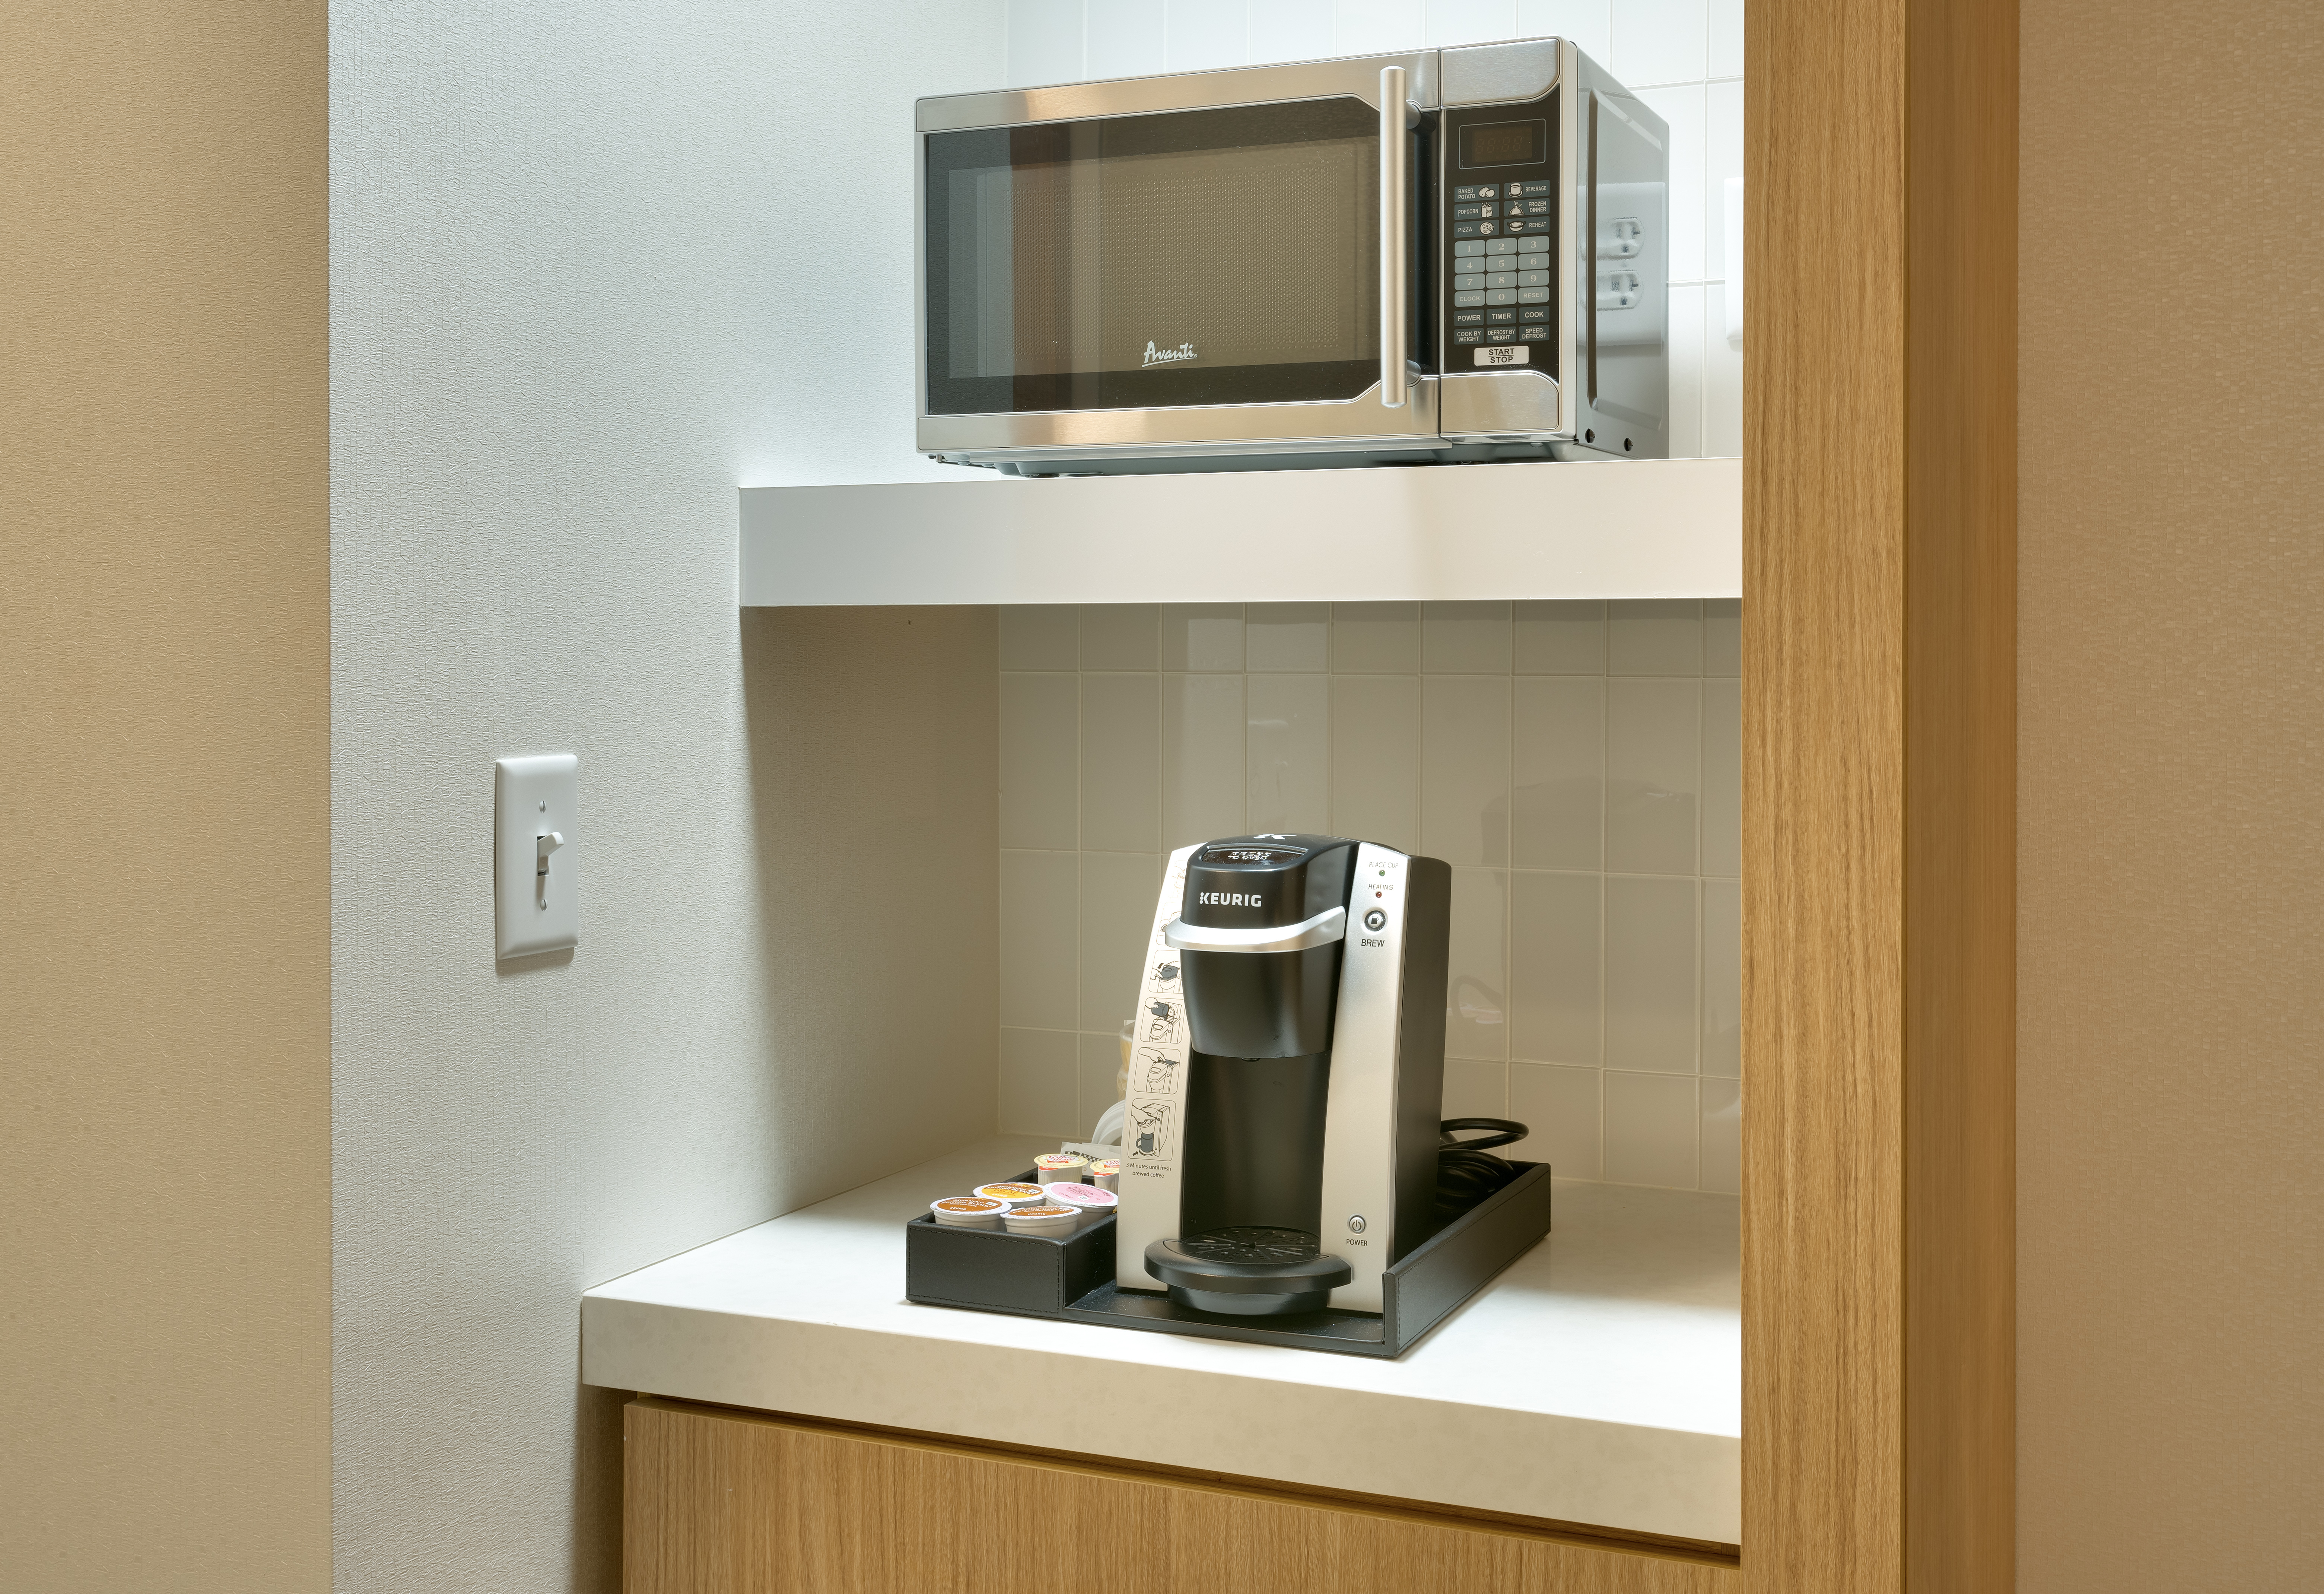 Guest Room Coffee Maker and Microwave